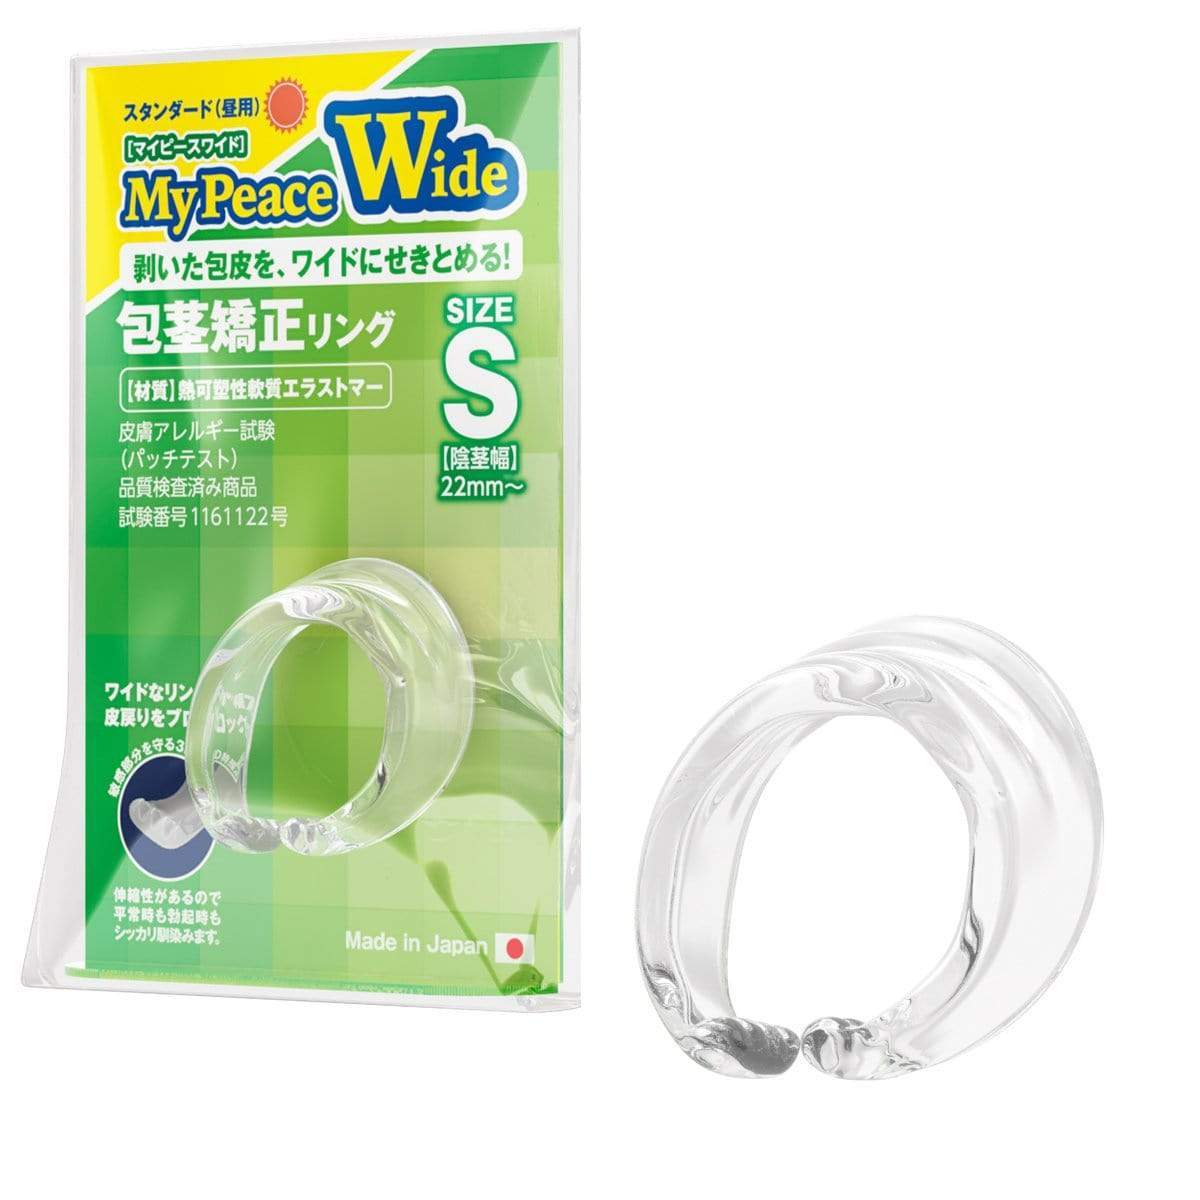 SSI Japan - My Peace Wide Standard Day Size S Correction Cock Ring (Clear) -  Cock Ring (Non Vibration)  Durio.sg